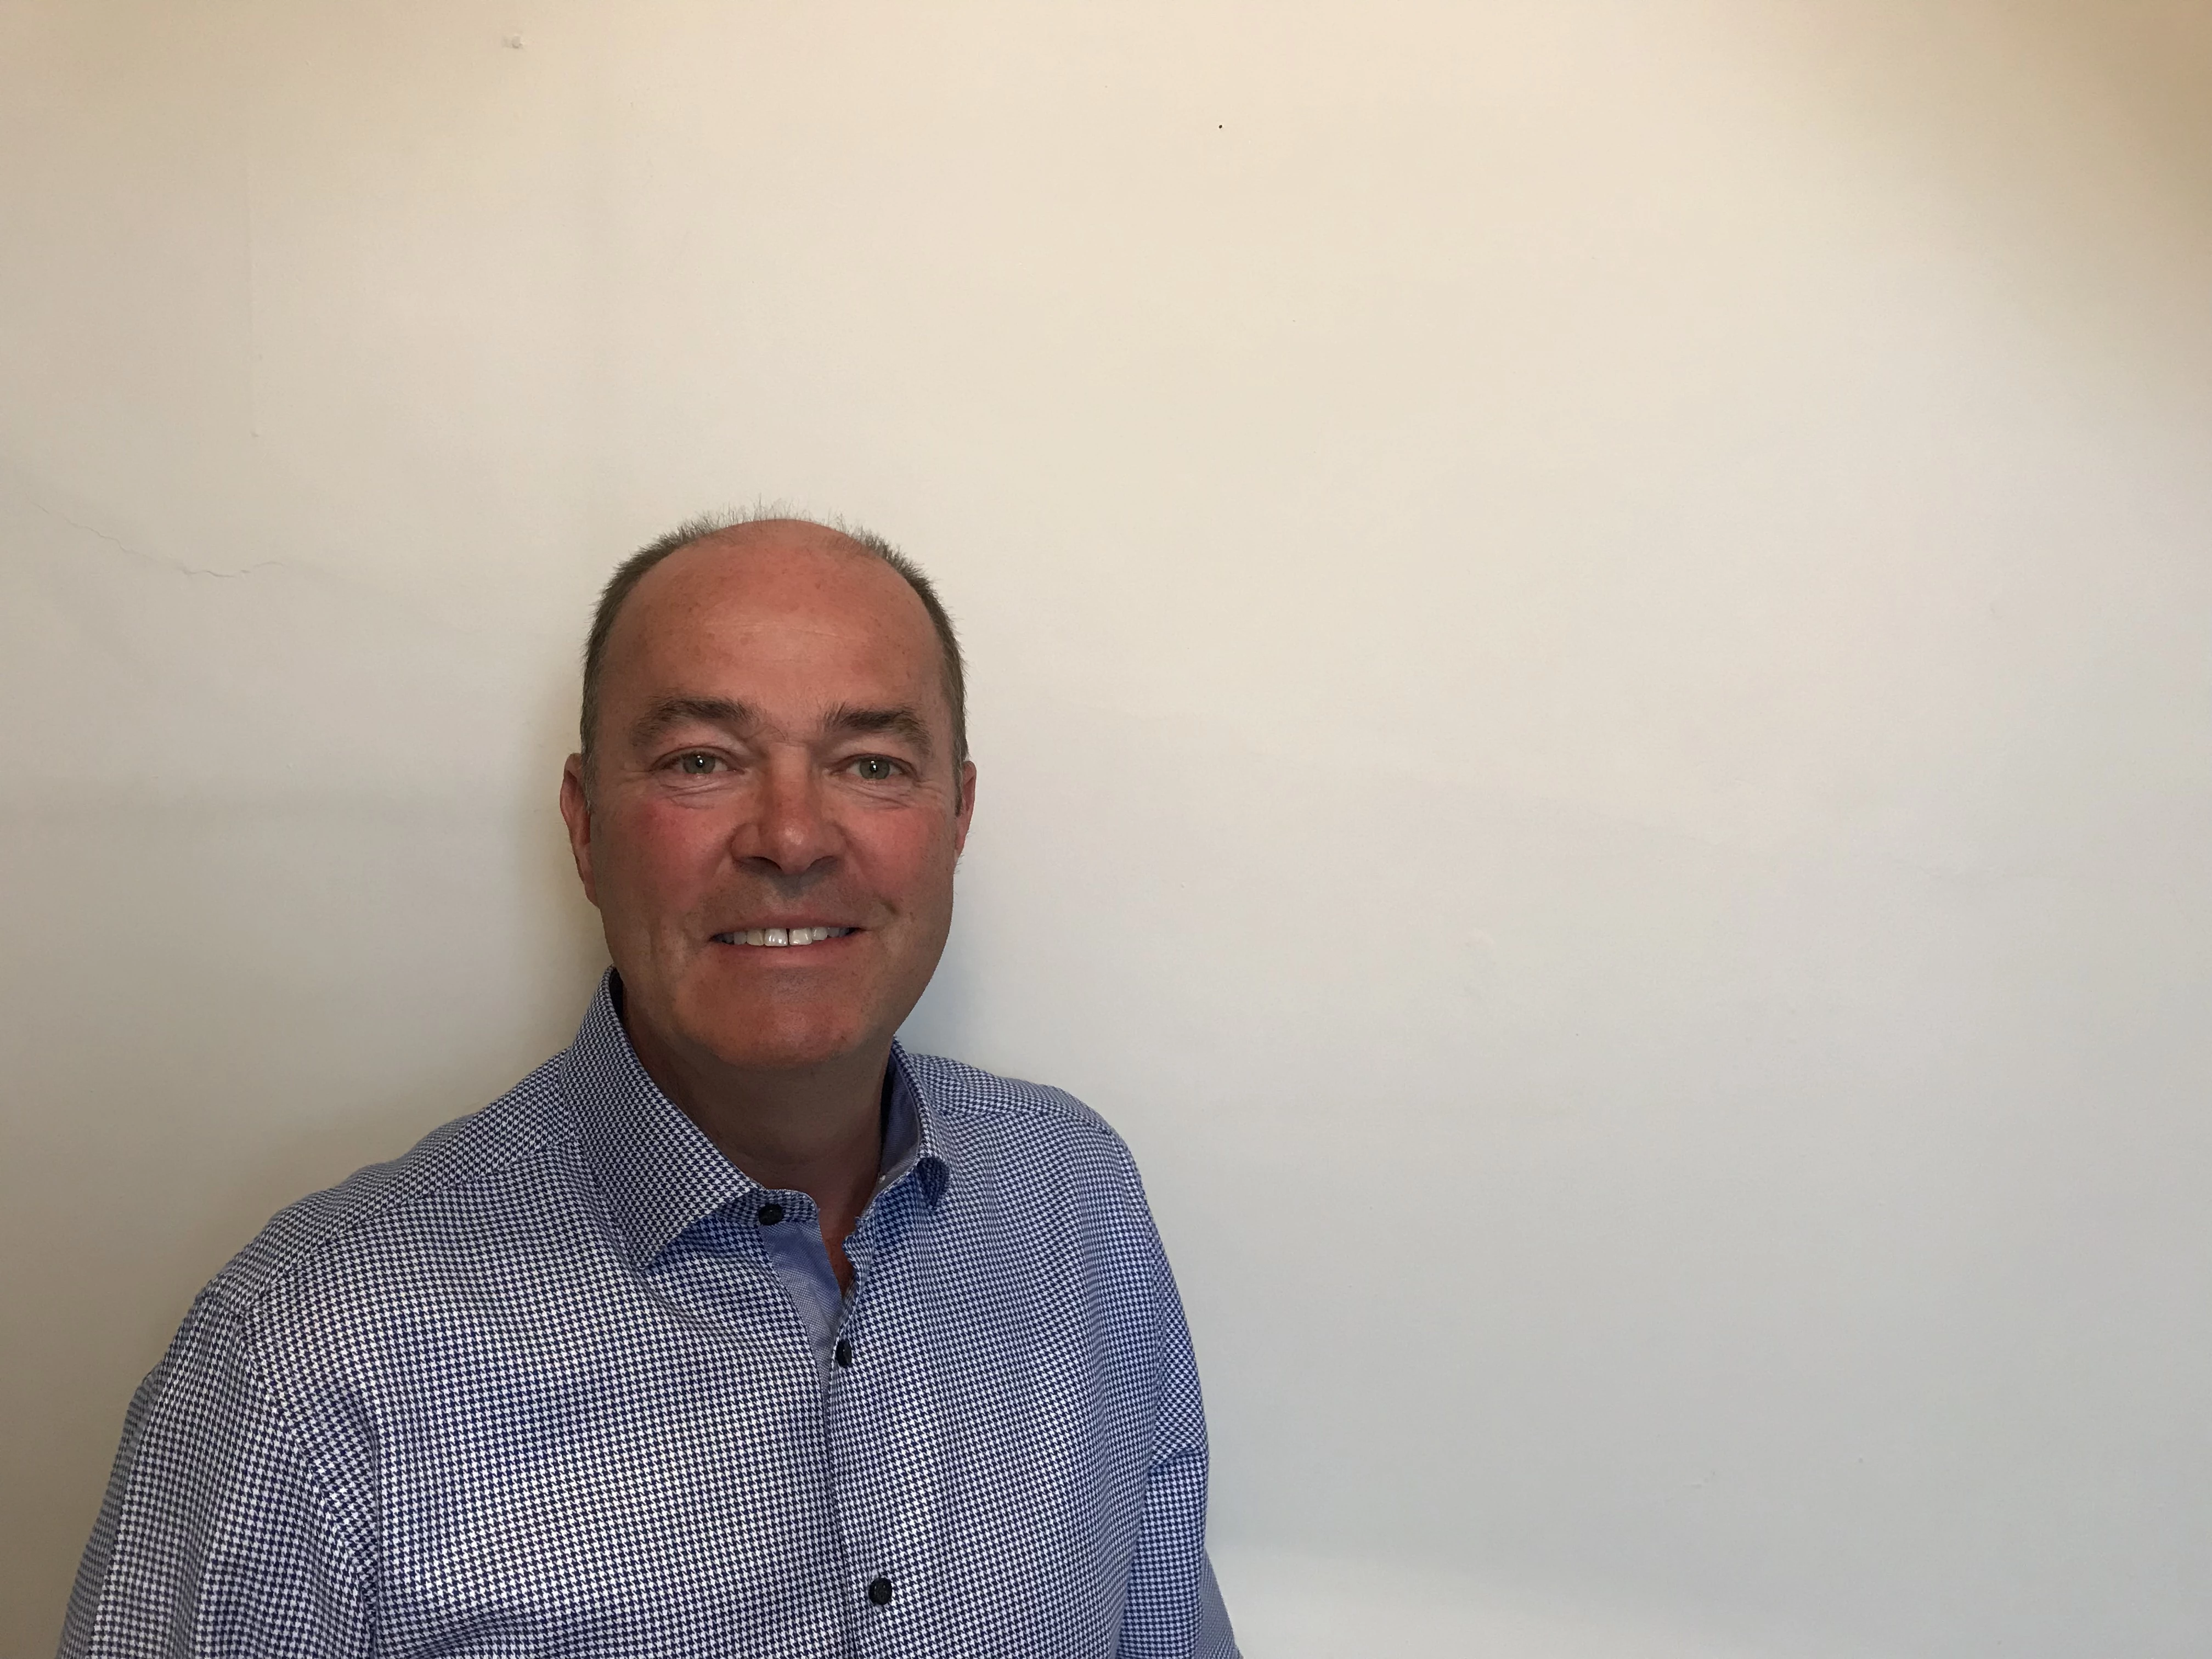 Chris Bunniss joins The Marketing Centre North West team